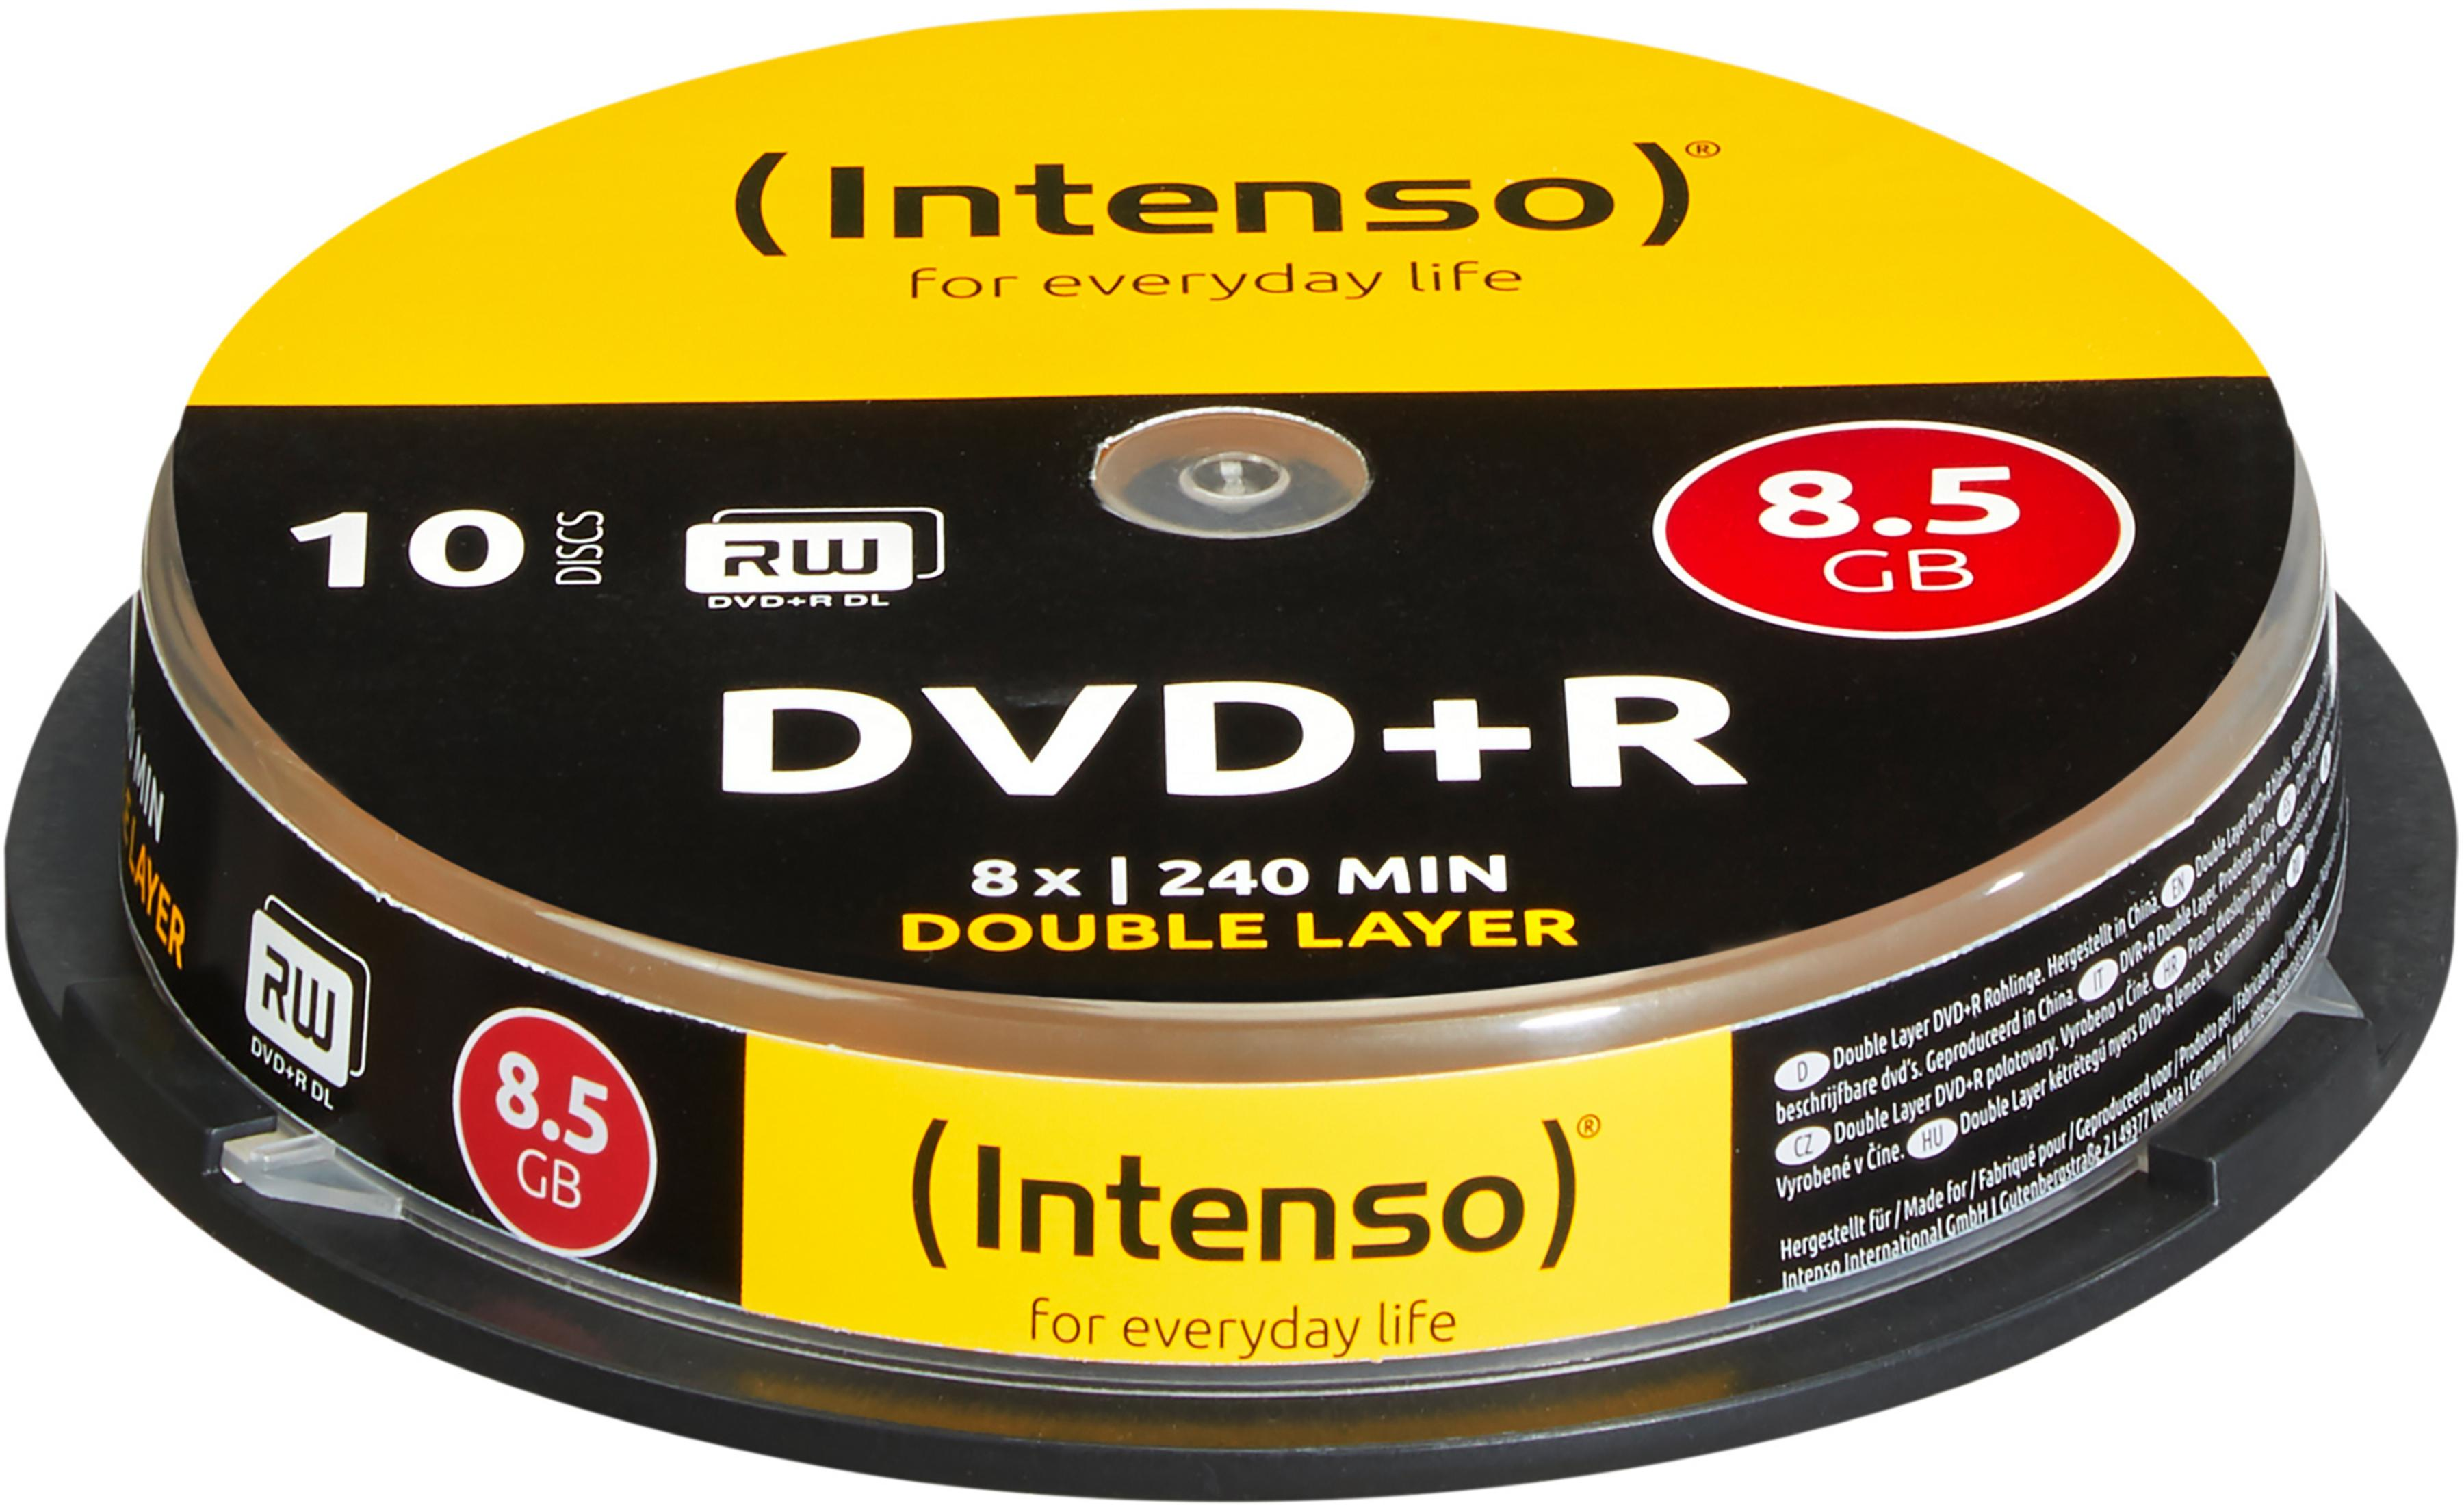 INTENSO 4311142 DVD+R DL 8X CB Rohlinge Double Layer 10ER DVD+R